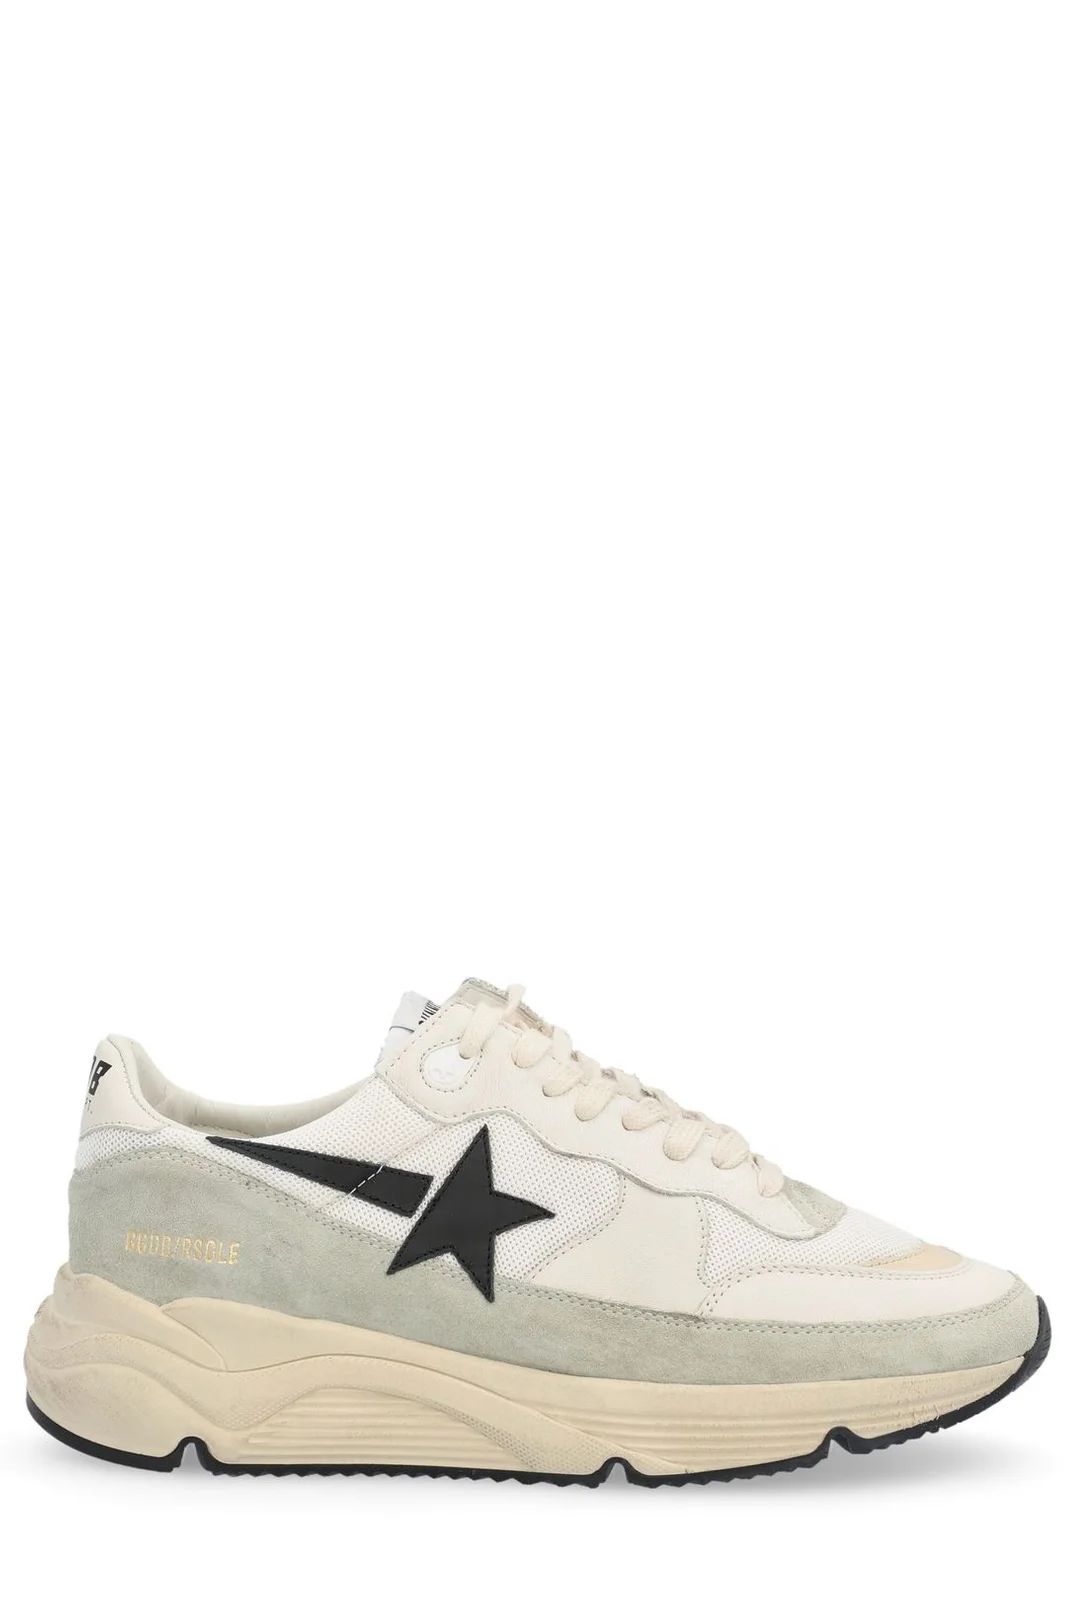 Golden Goose Deluxe Brand Lace-Up Sneakers | Cettire Global